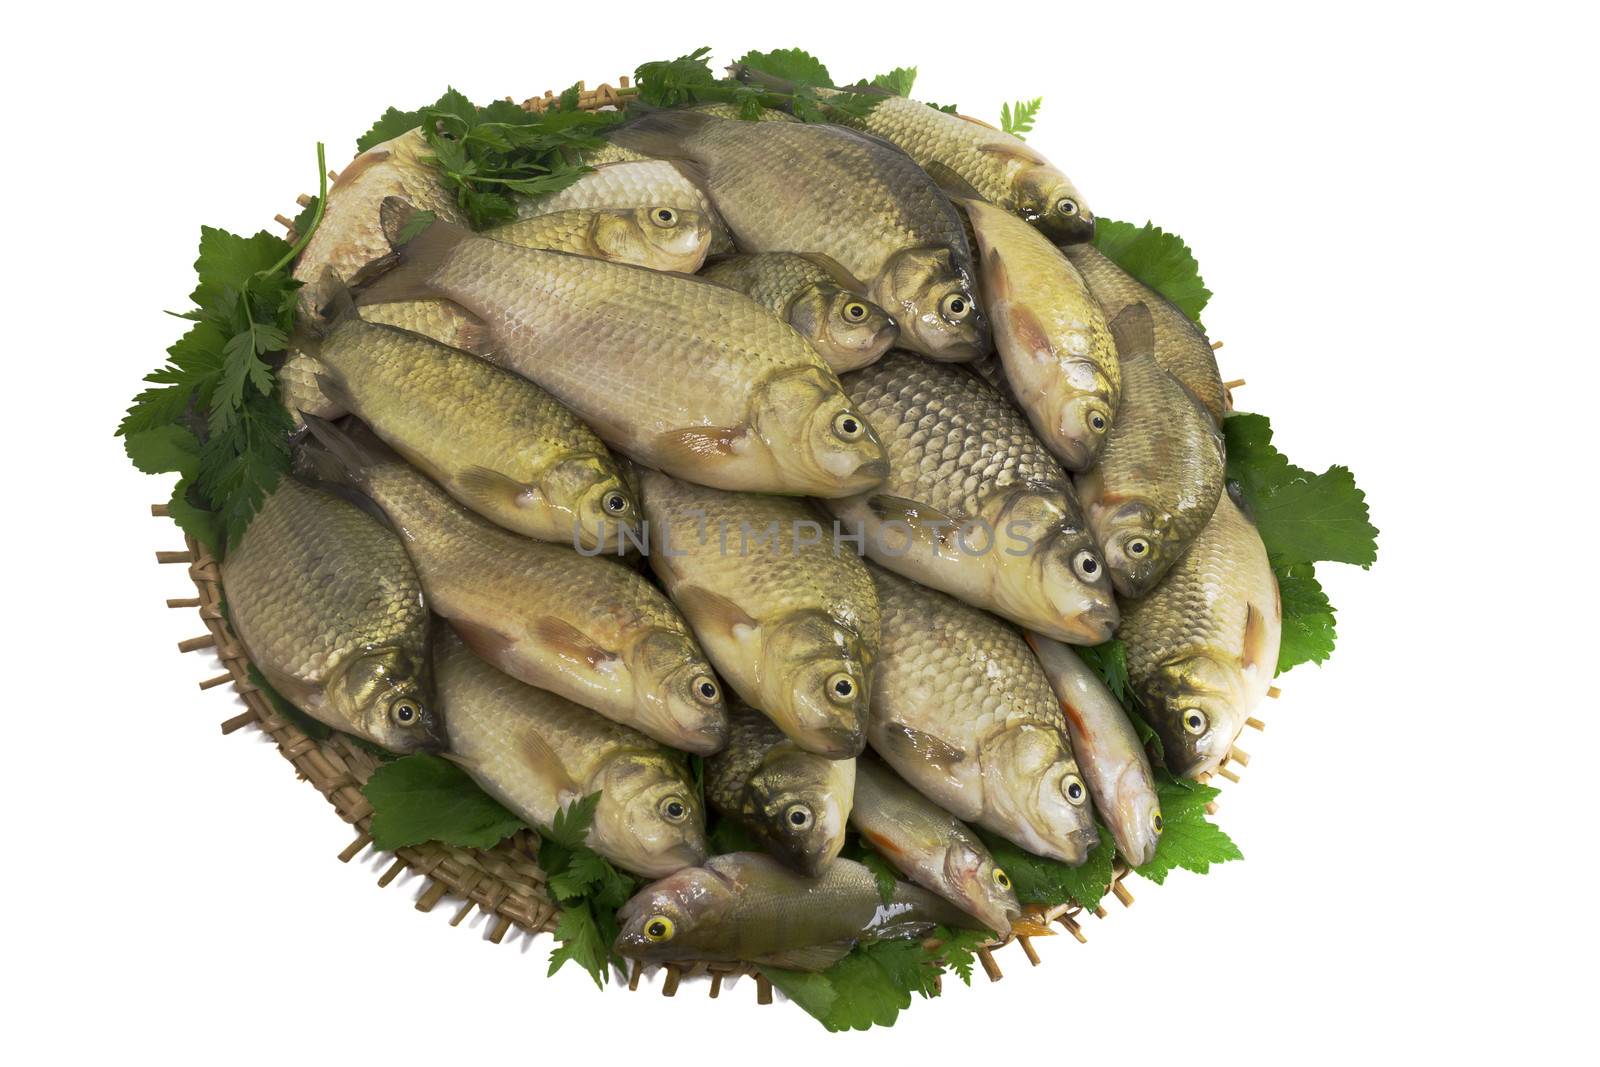 Carp and greens on a round dish. Presented on a white background.